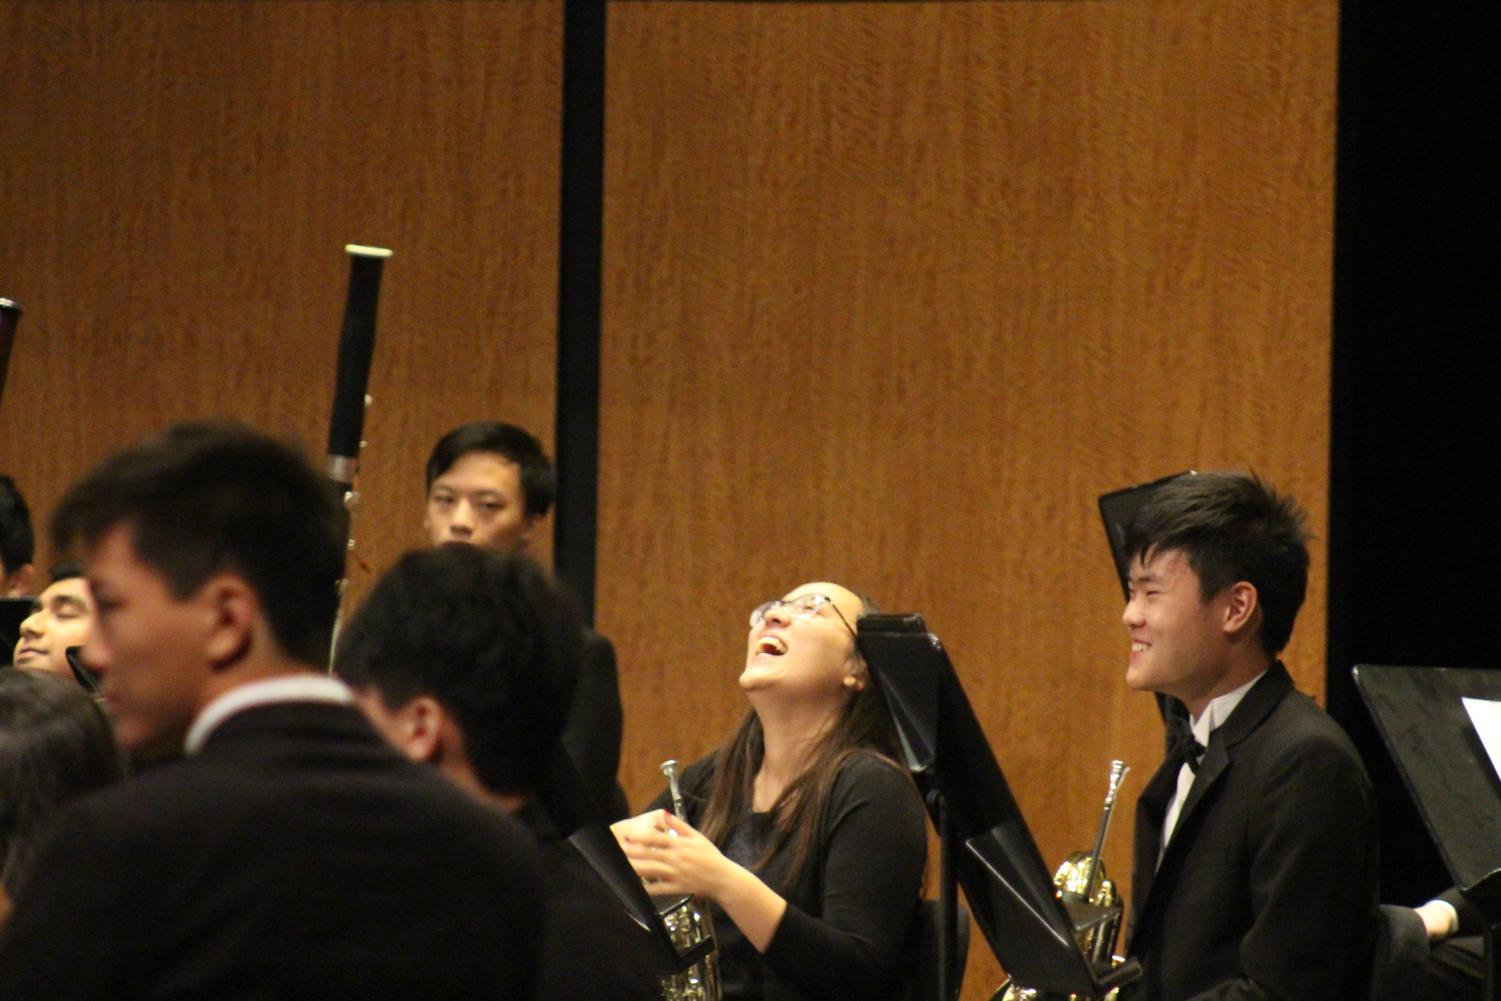 Miriam SIlberman '19 laughs during a break in the performance. Silberman is a member of band, but performed with Patriot Orchestra during the concert.